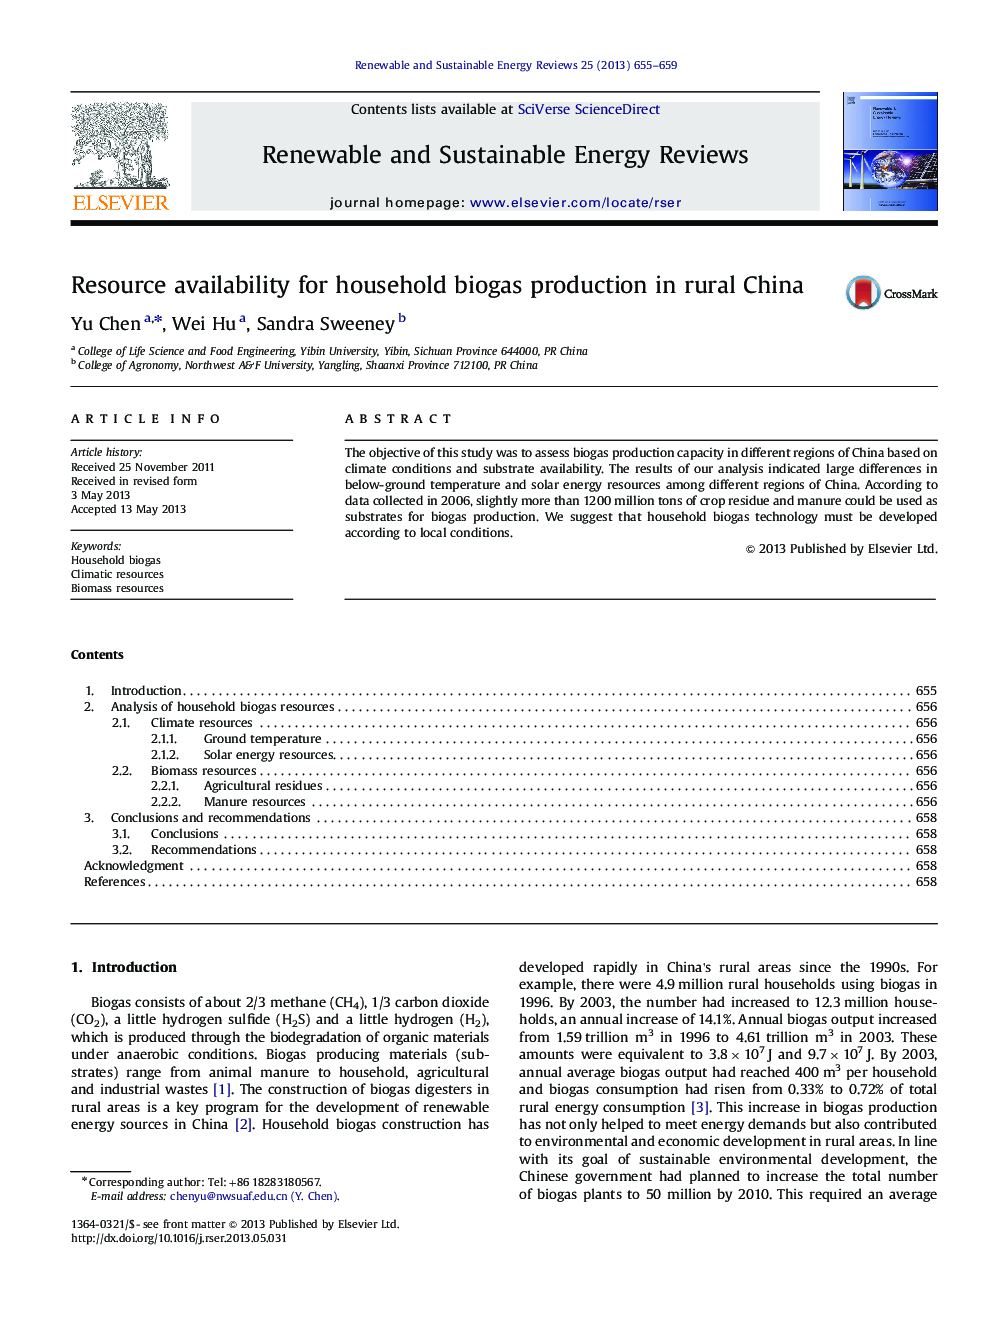 Resource availability for household biogas production in rural China